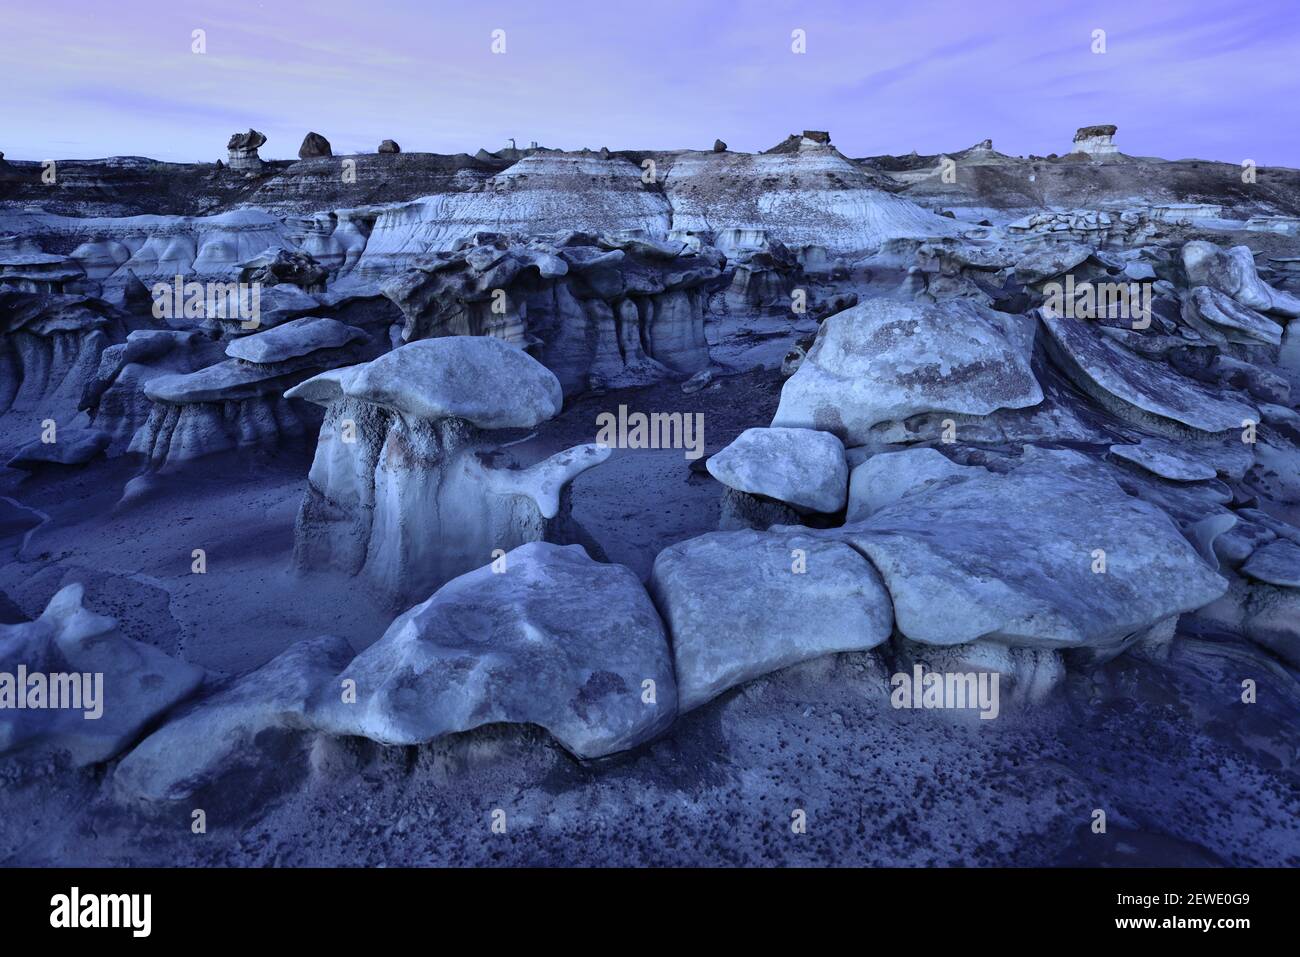 Formations pictured at sunset in the Bisti/De-Na-Zin Wilderness in New Mexico on April 9, 2016. The area was once a delta that lay to the west of the Western Interior Seaway 70 million years ago, and the badlands  were formed by the erosion of the sandy Ojo Alamo Formation. (Photo by Alex Milan Tracy) *** Please Use Credit from Credit Field *** Stock Photo